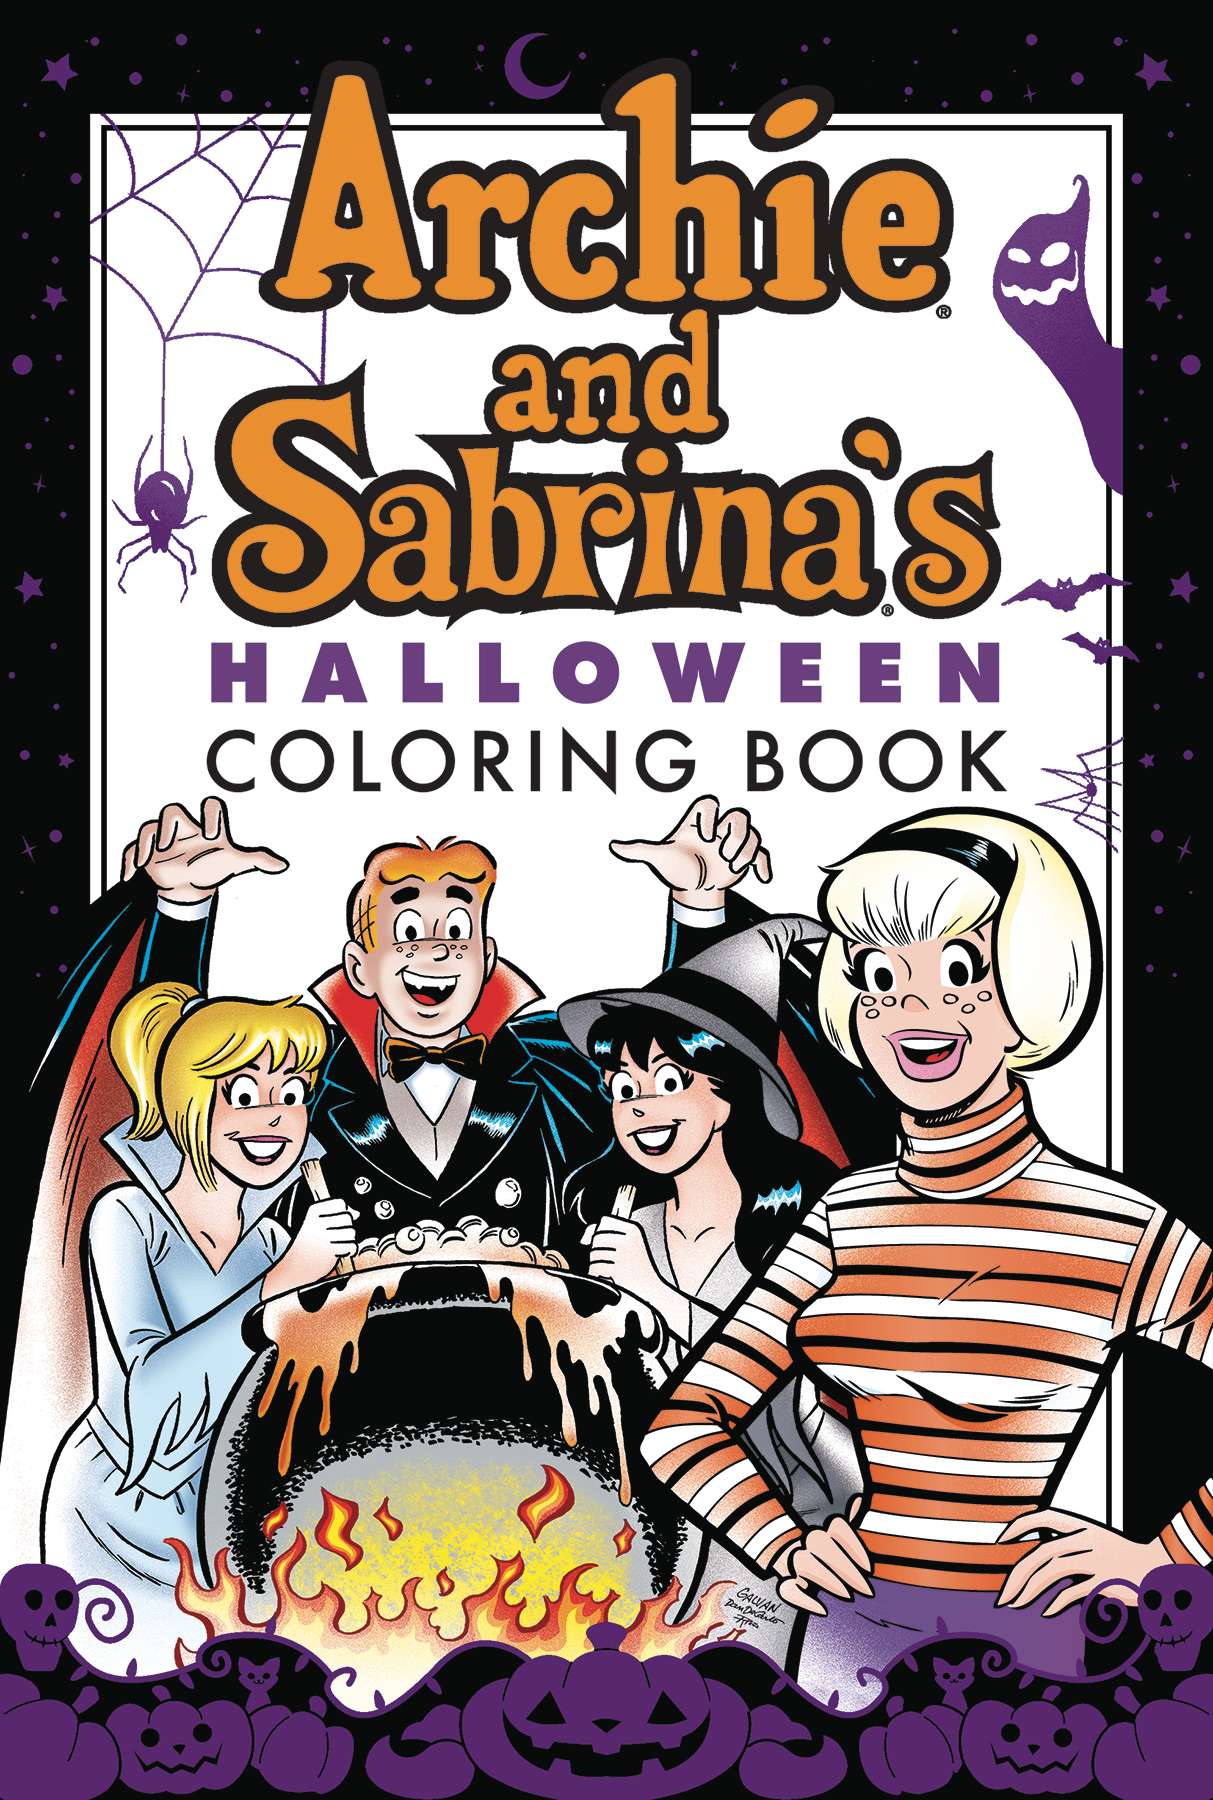 Archie & Sabrina Halloween Coloring Book Soft Cover